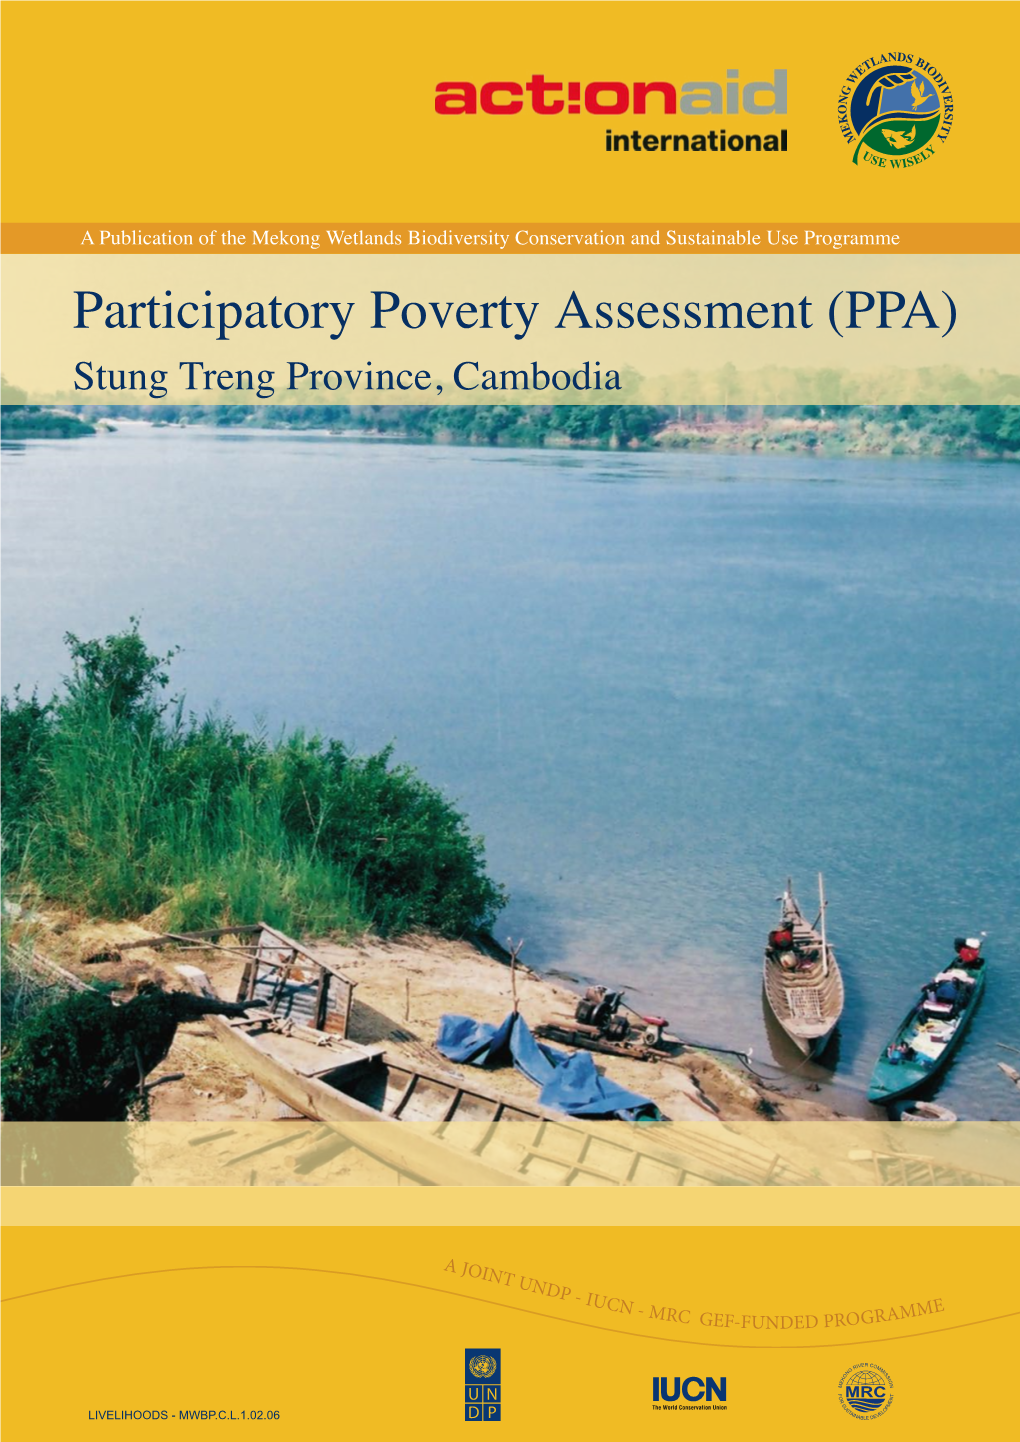 Participatory Poverty Assessments